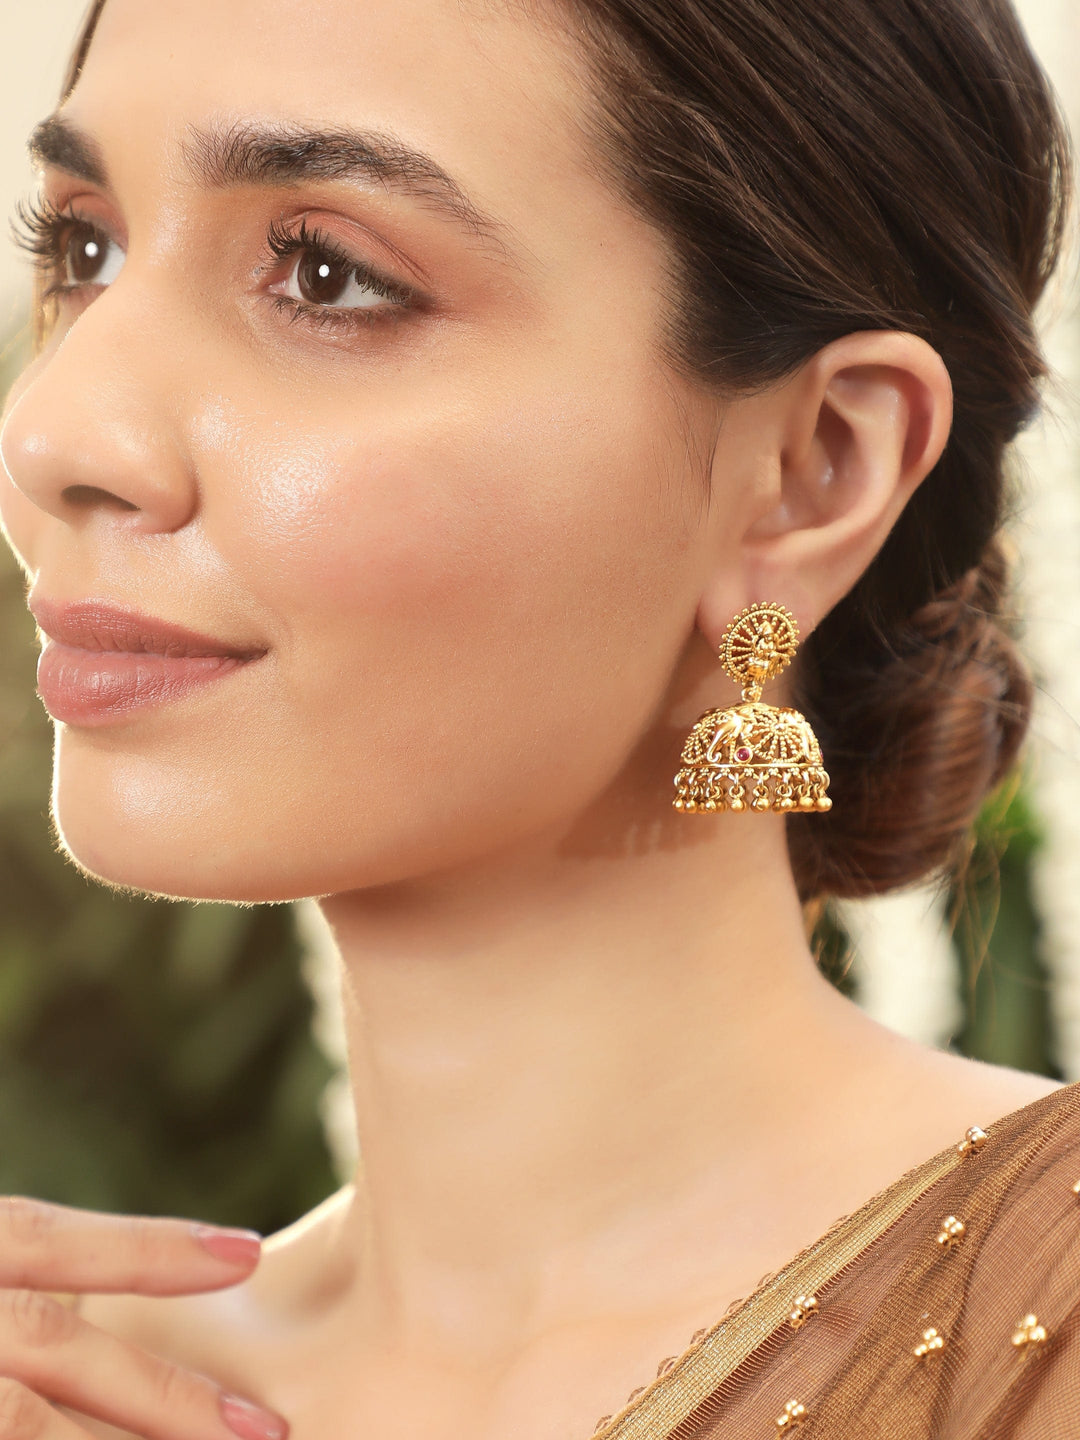 Rubans Exquisite 22k Gold-Plated Temple Floral Jhumka Earrings Earrings